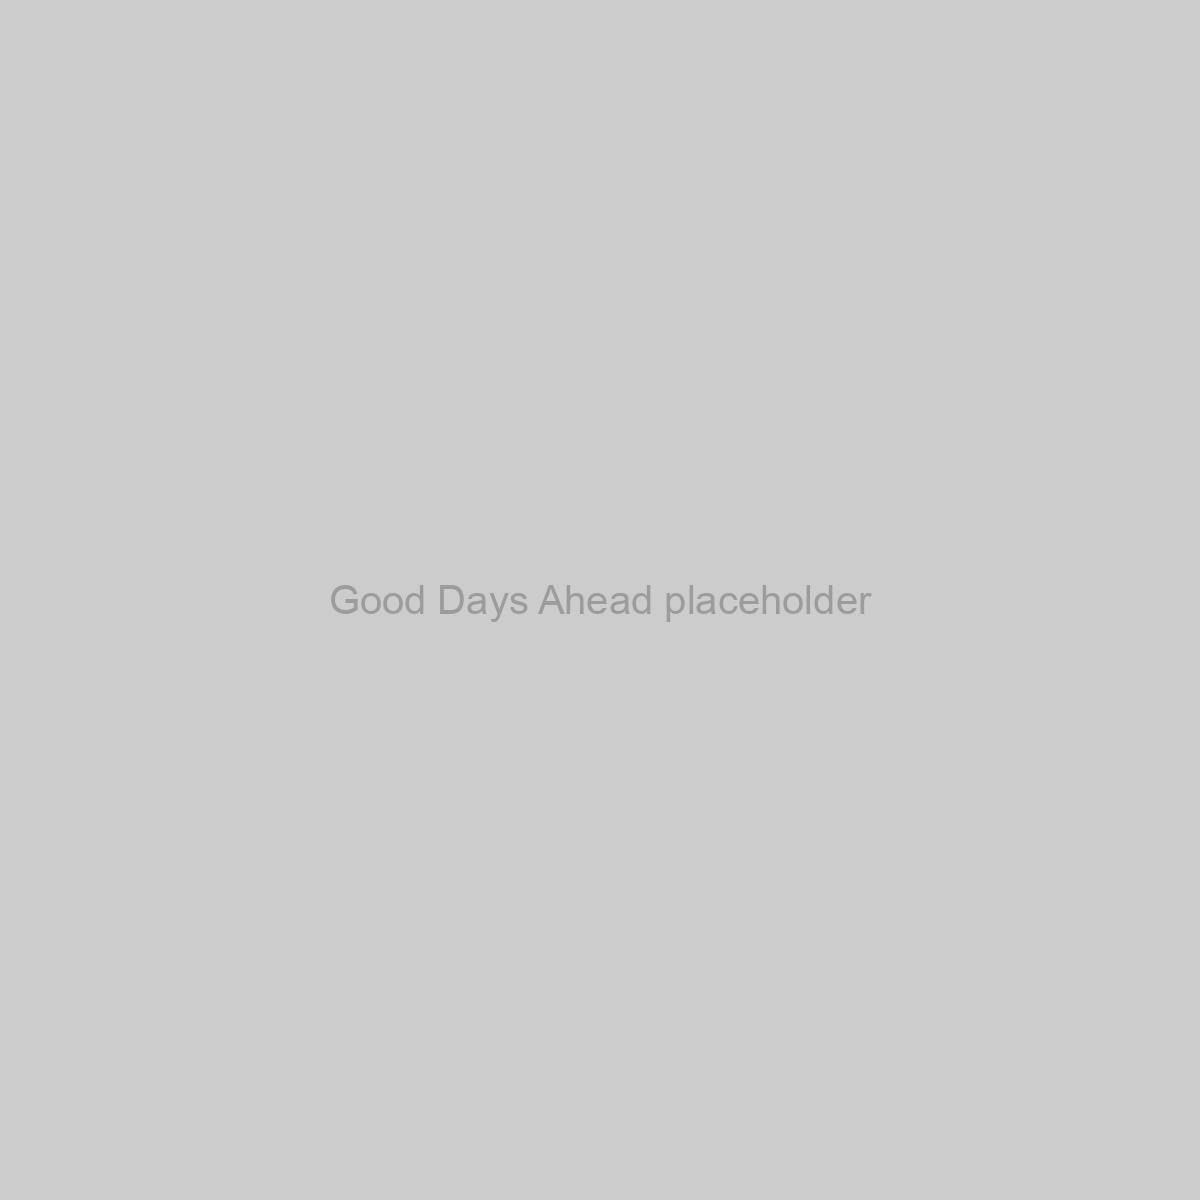 Good Days Ahead Placeholder Image